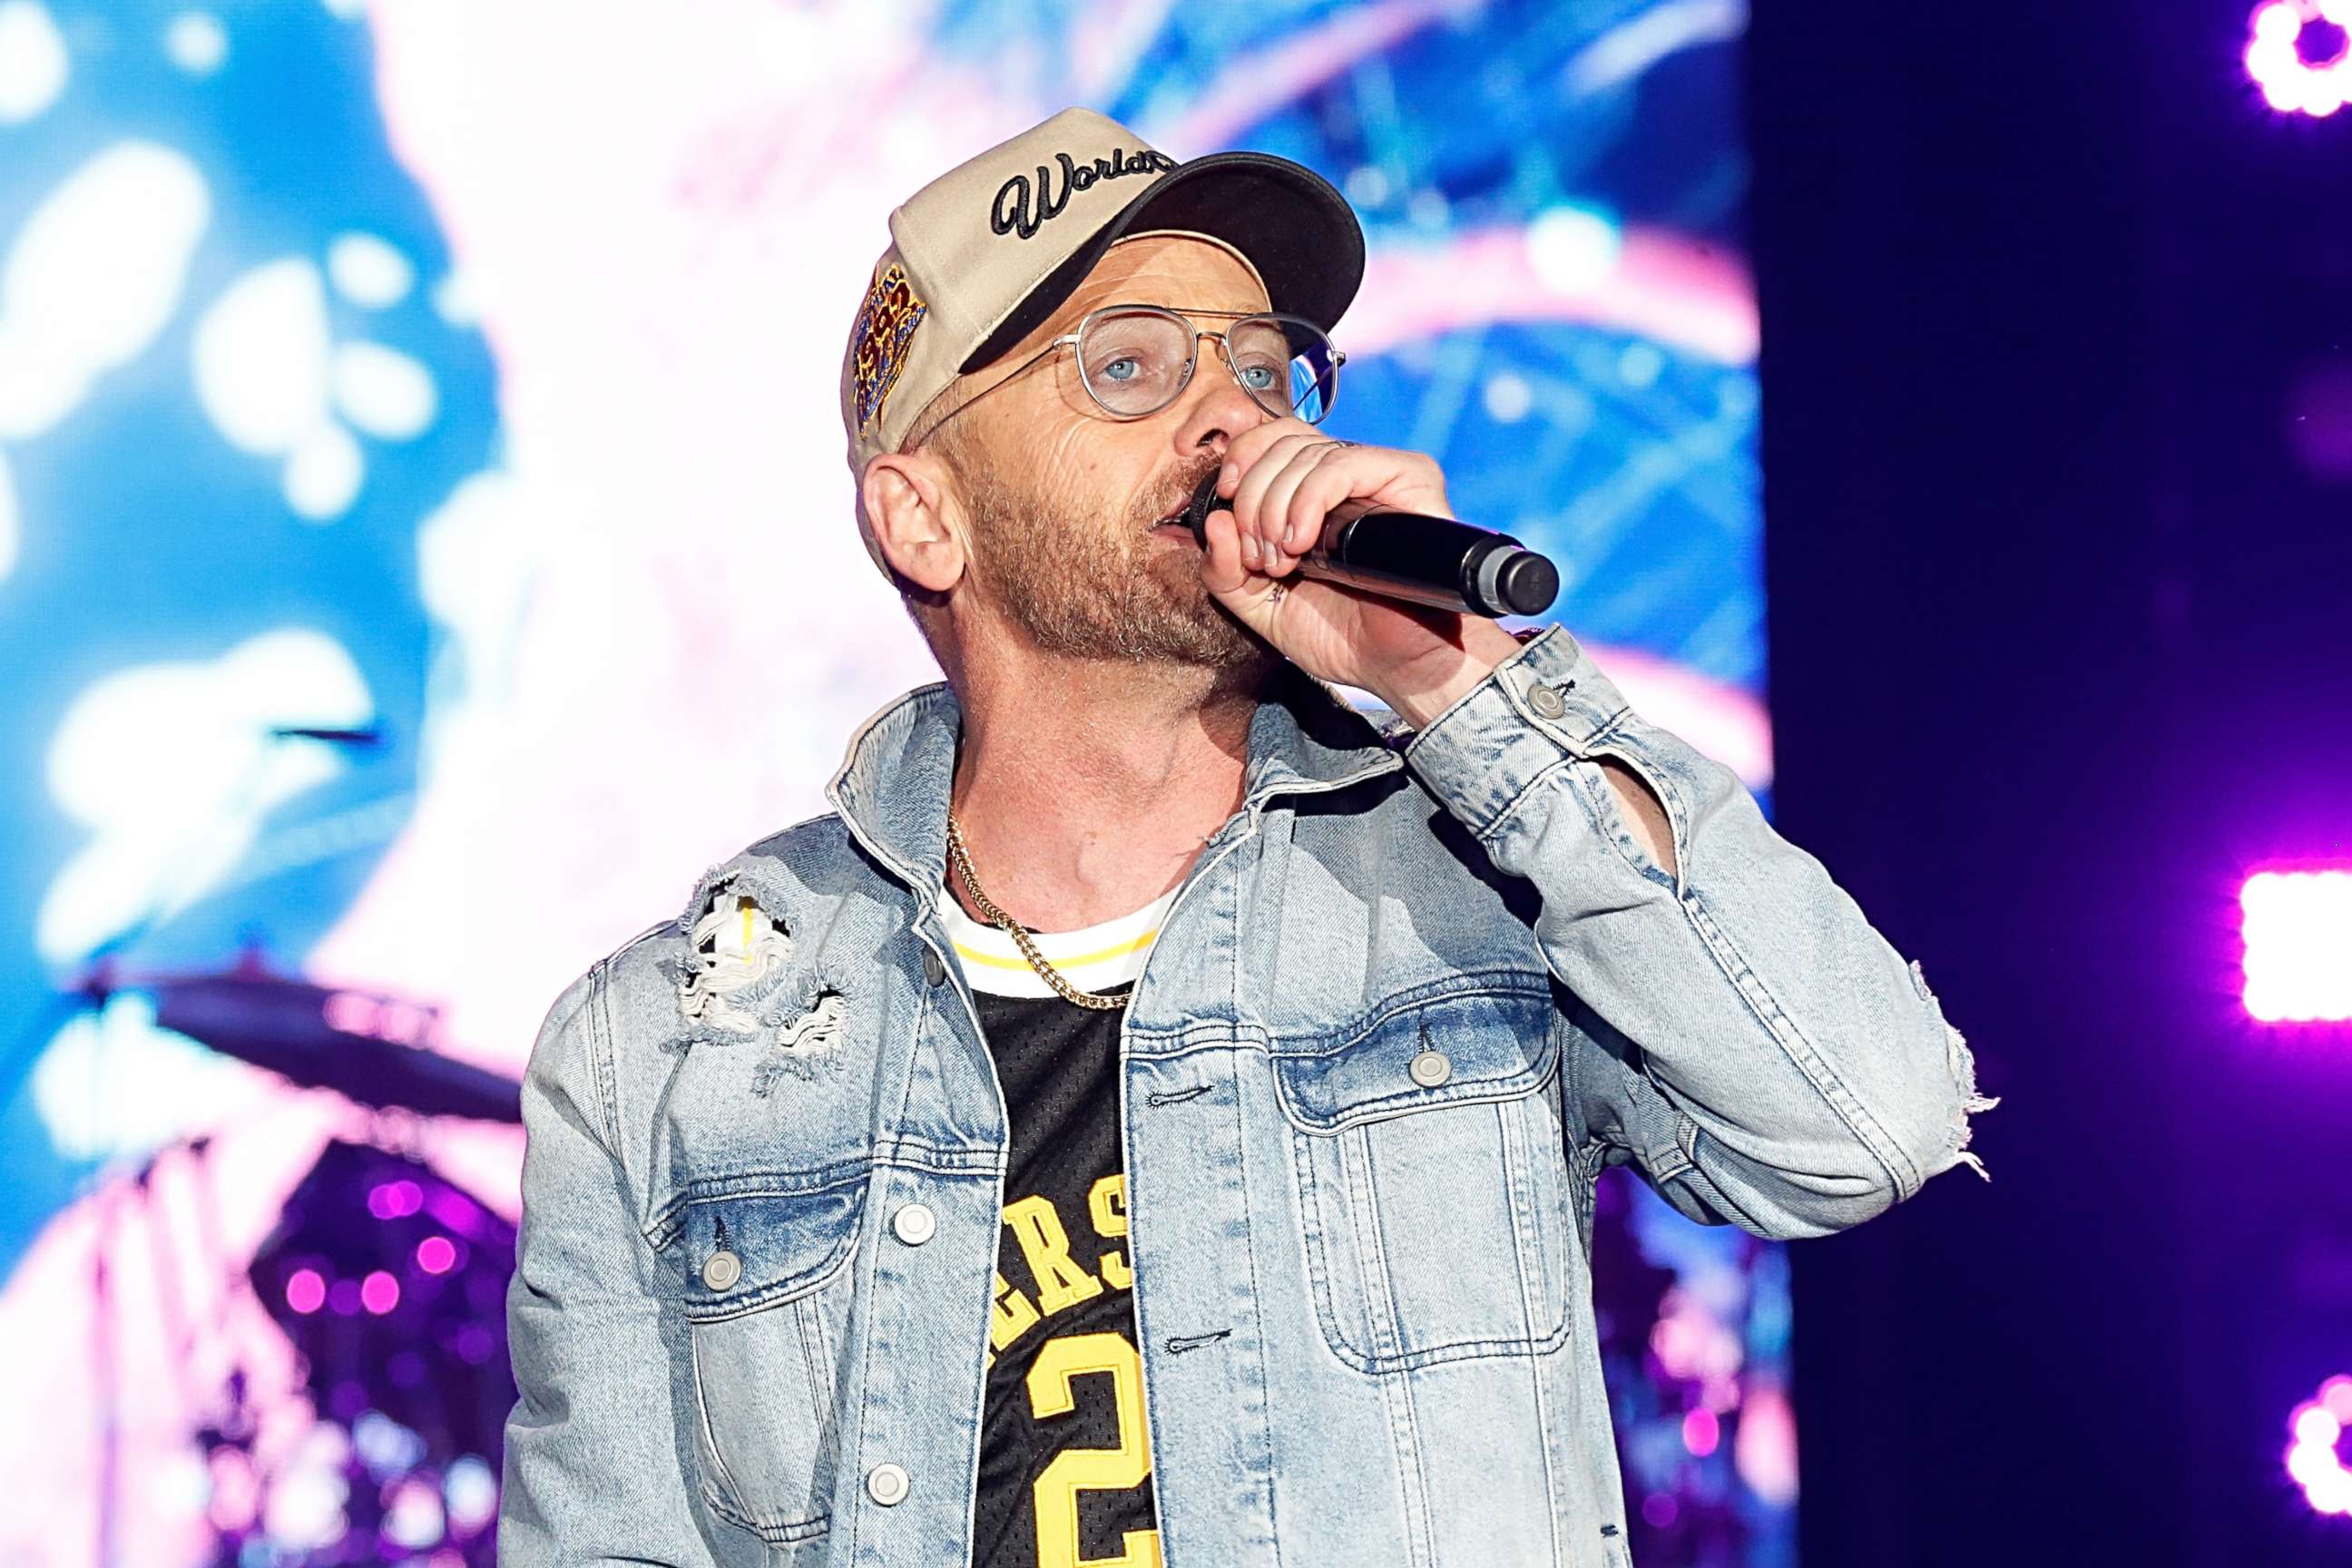 PHOTO: TobyMac performs at The Hulu Theater at Madison Square Garden on April 1, 2022 in New York City.